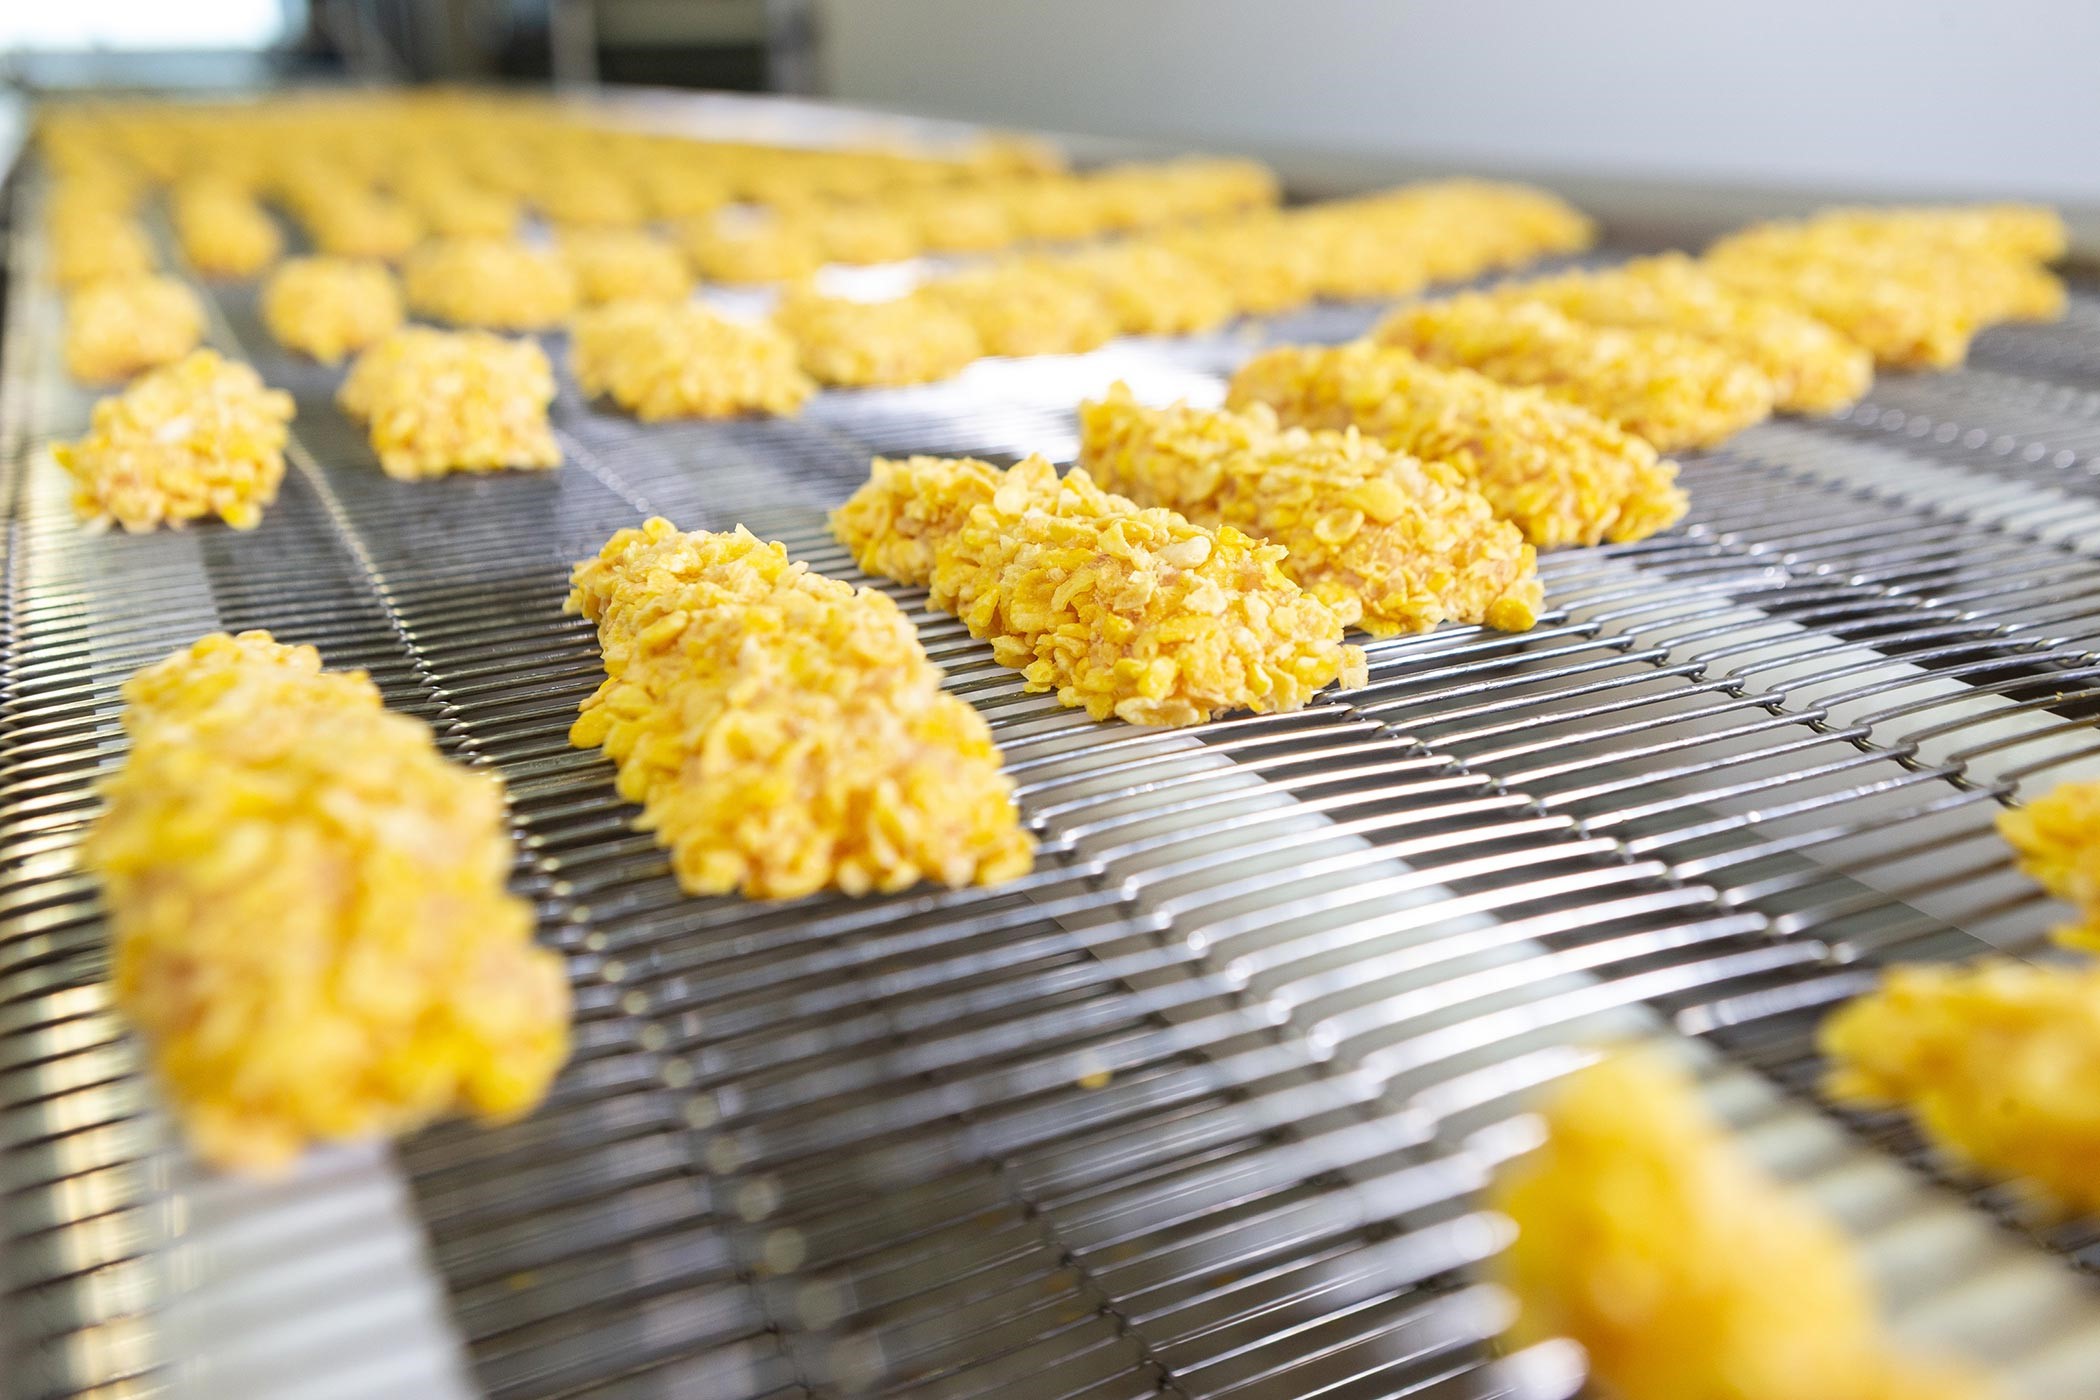 Marel's food processing convenience line creates highest quality coated poultry products